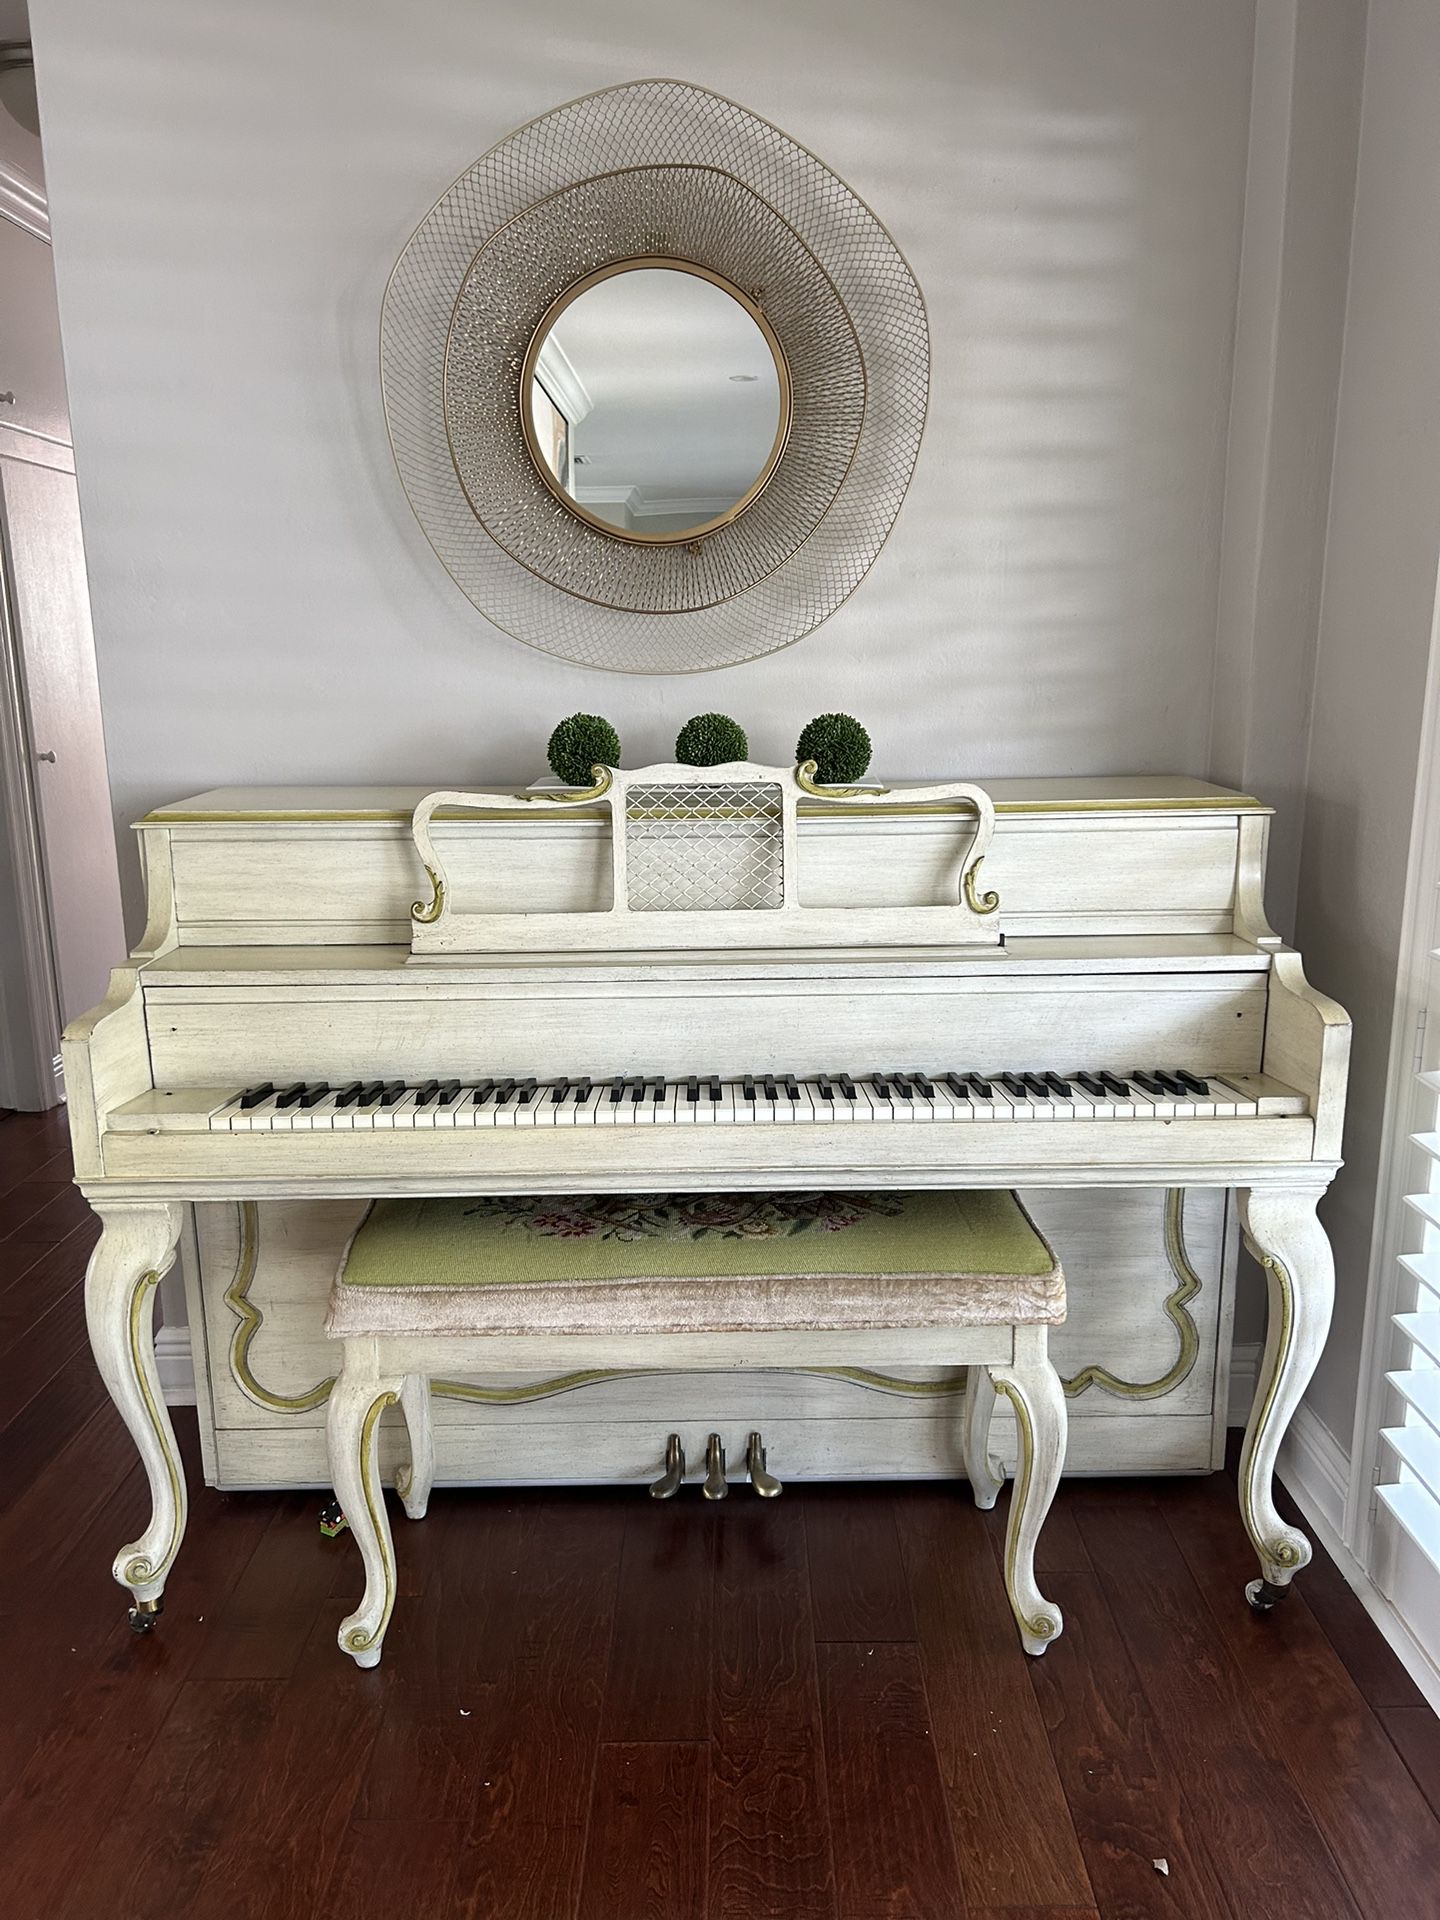 FREE - Piano with bench 